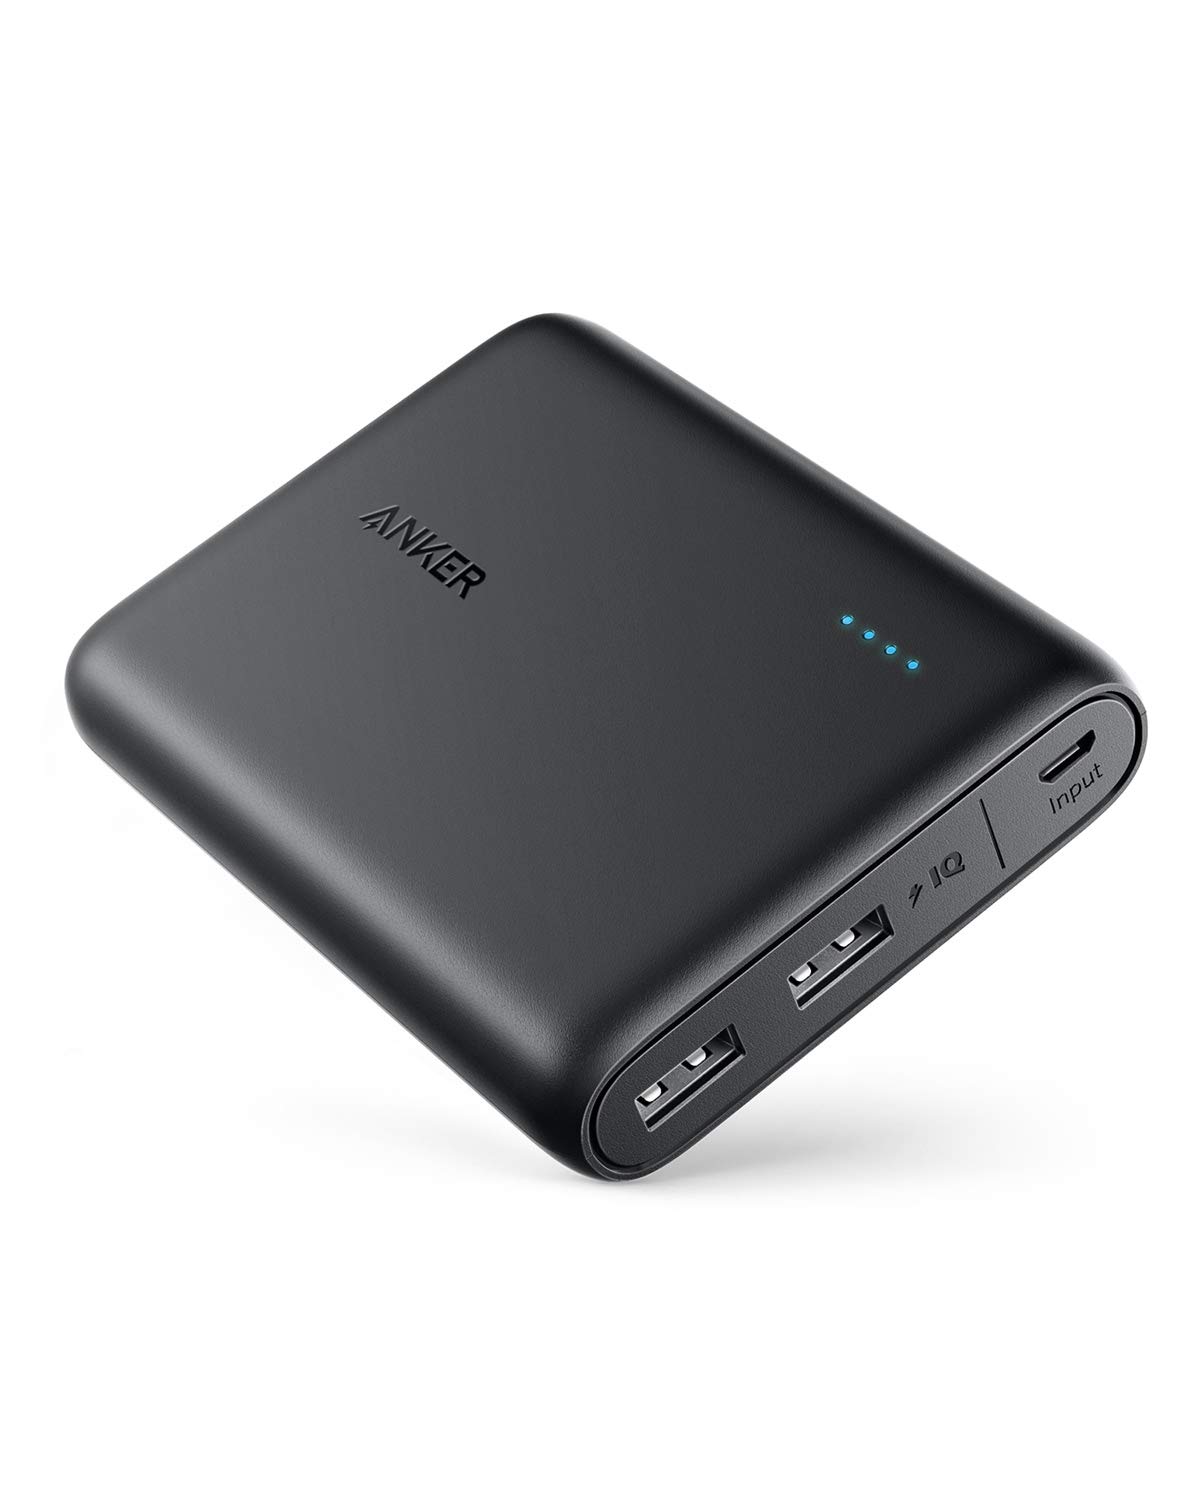 Anker PowerCore 13000 Power Bank - Compact 13000mAh 2-Port Ultra Portable Phone Charger with PowerIQ and VoltageBoost Technology for New Airpods, iPhone X/ 8/ 8 Plus, iPad, Samsung Galaxy